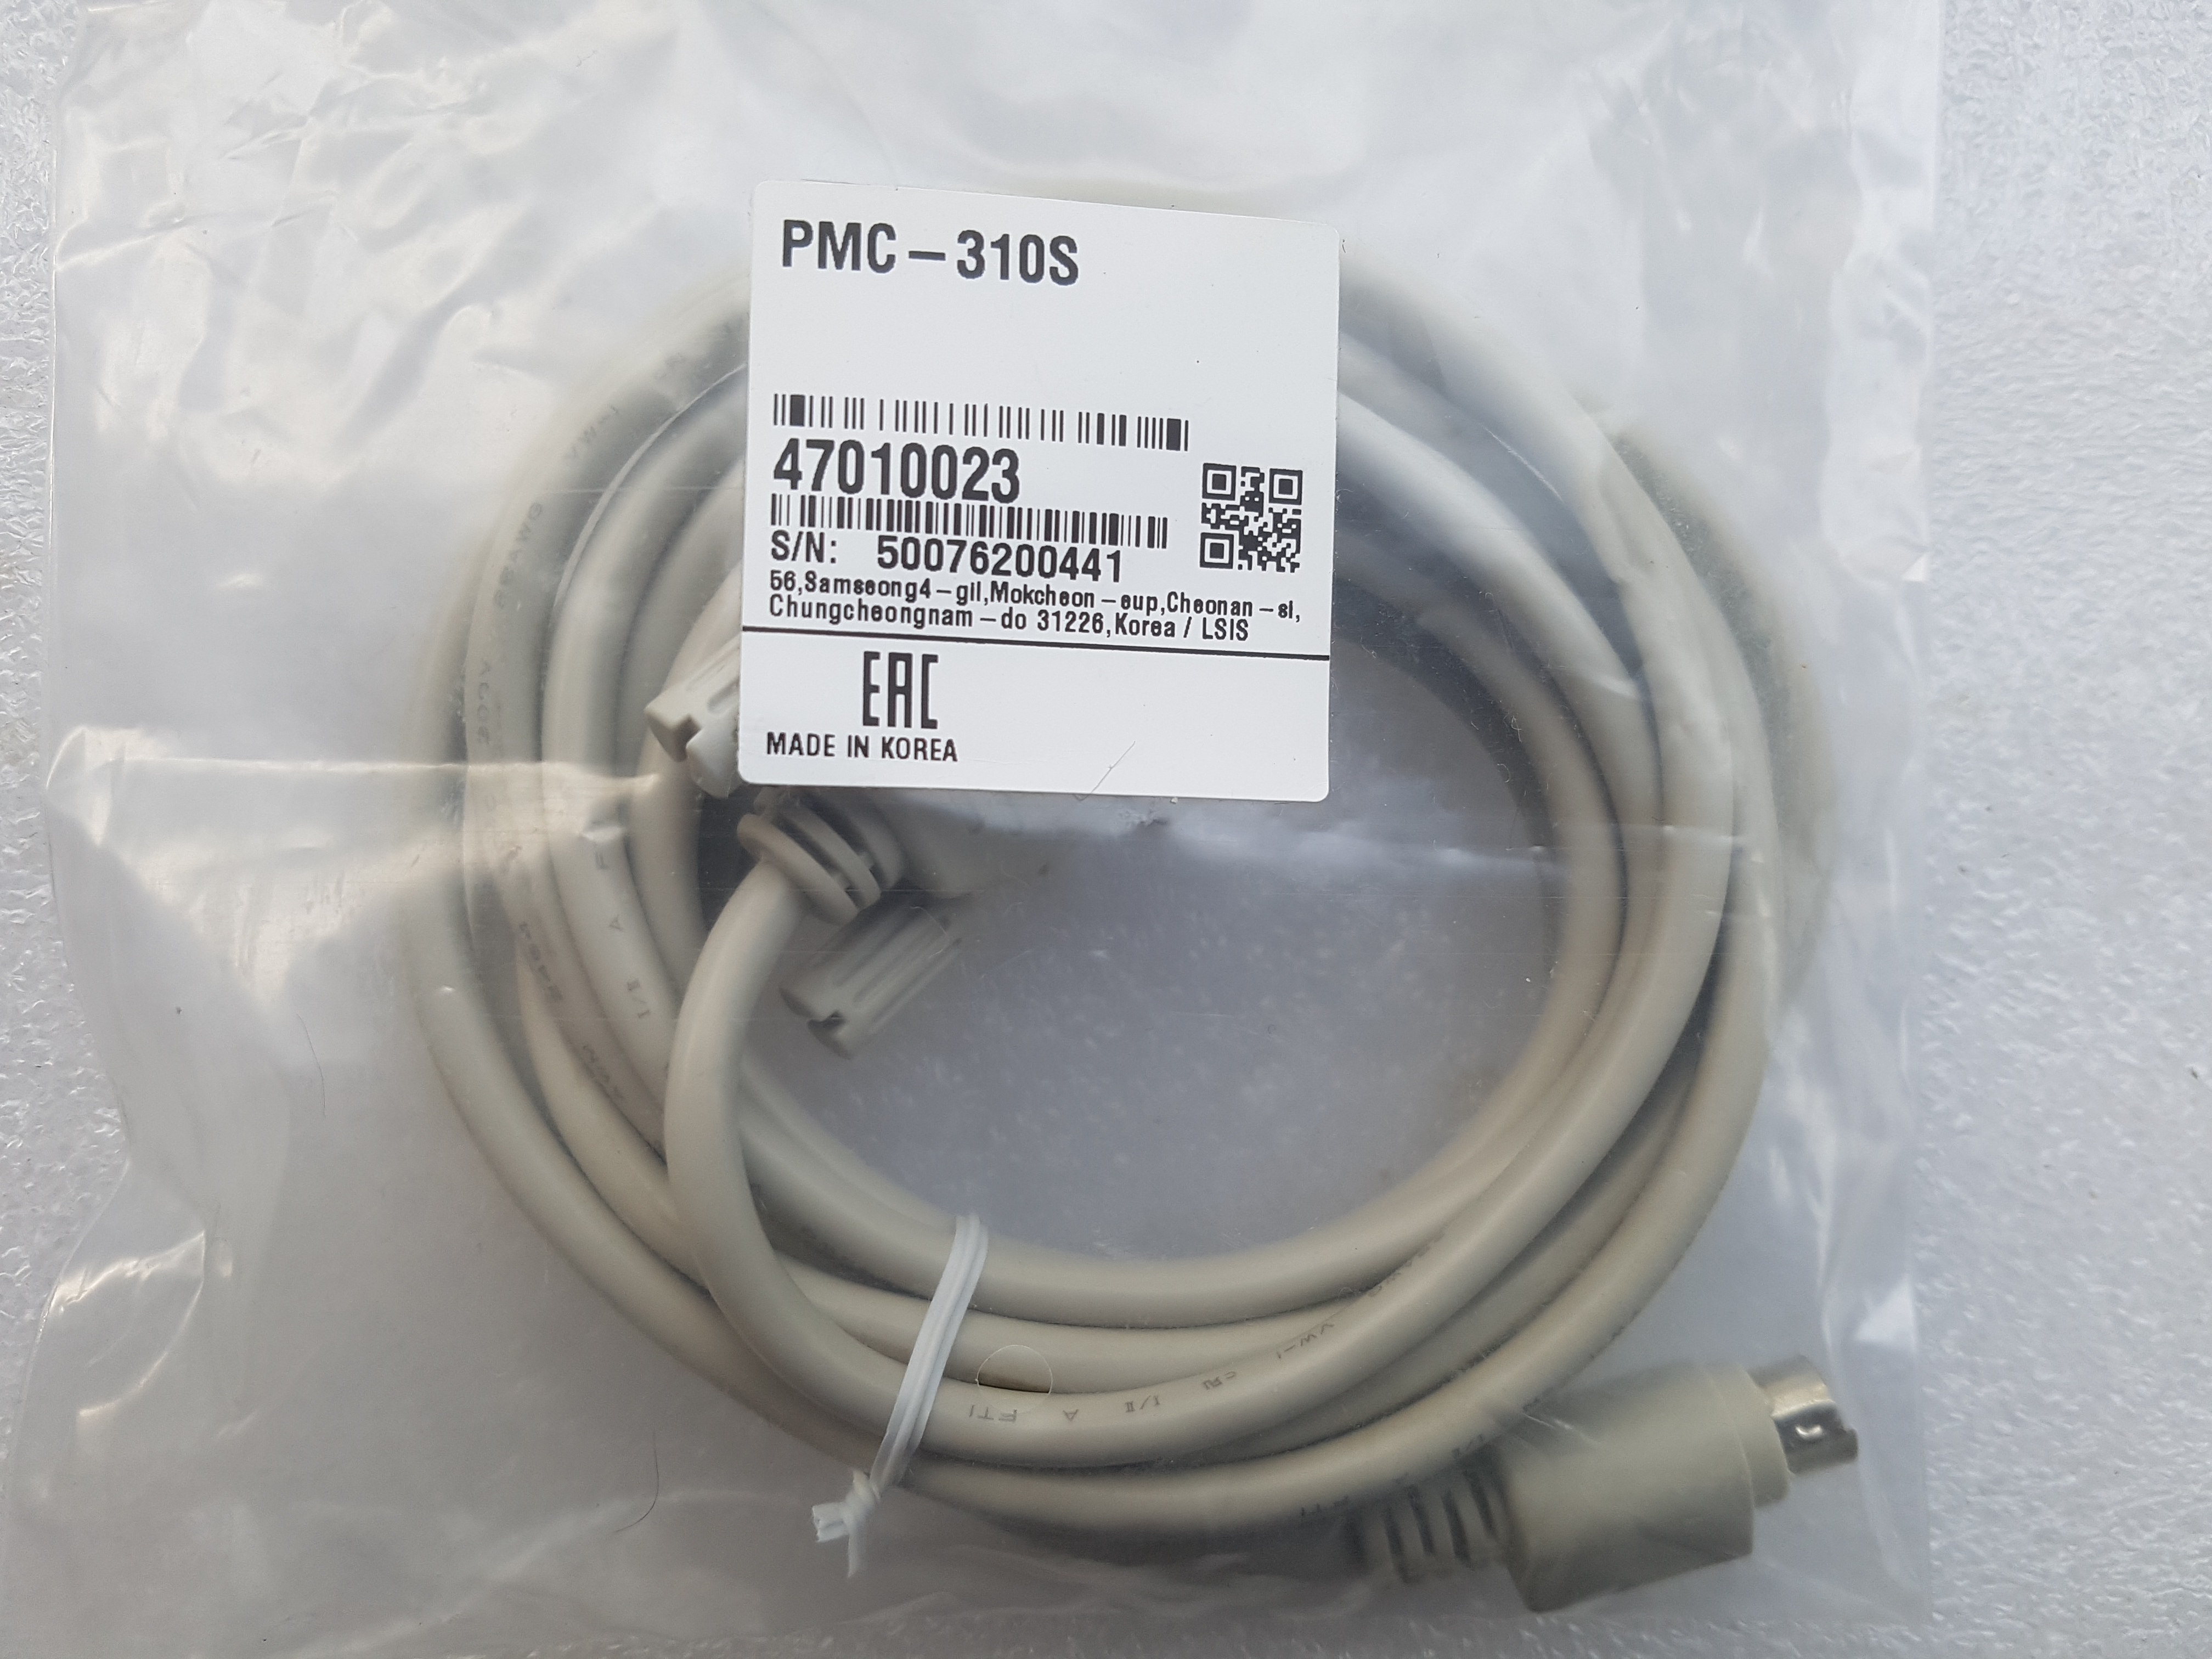 Cable PMC-310S.jpg